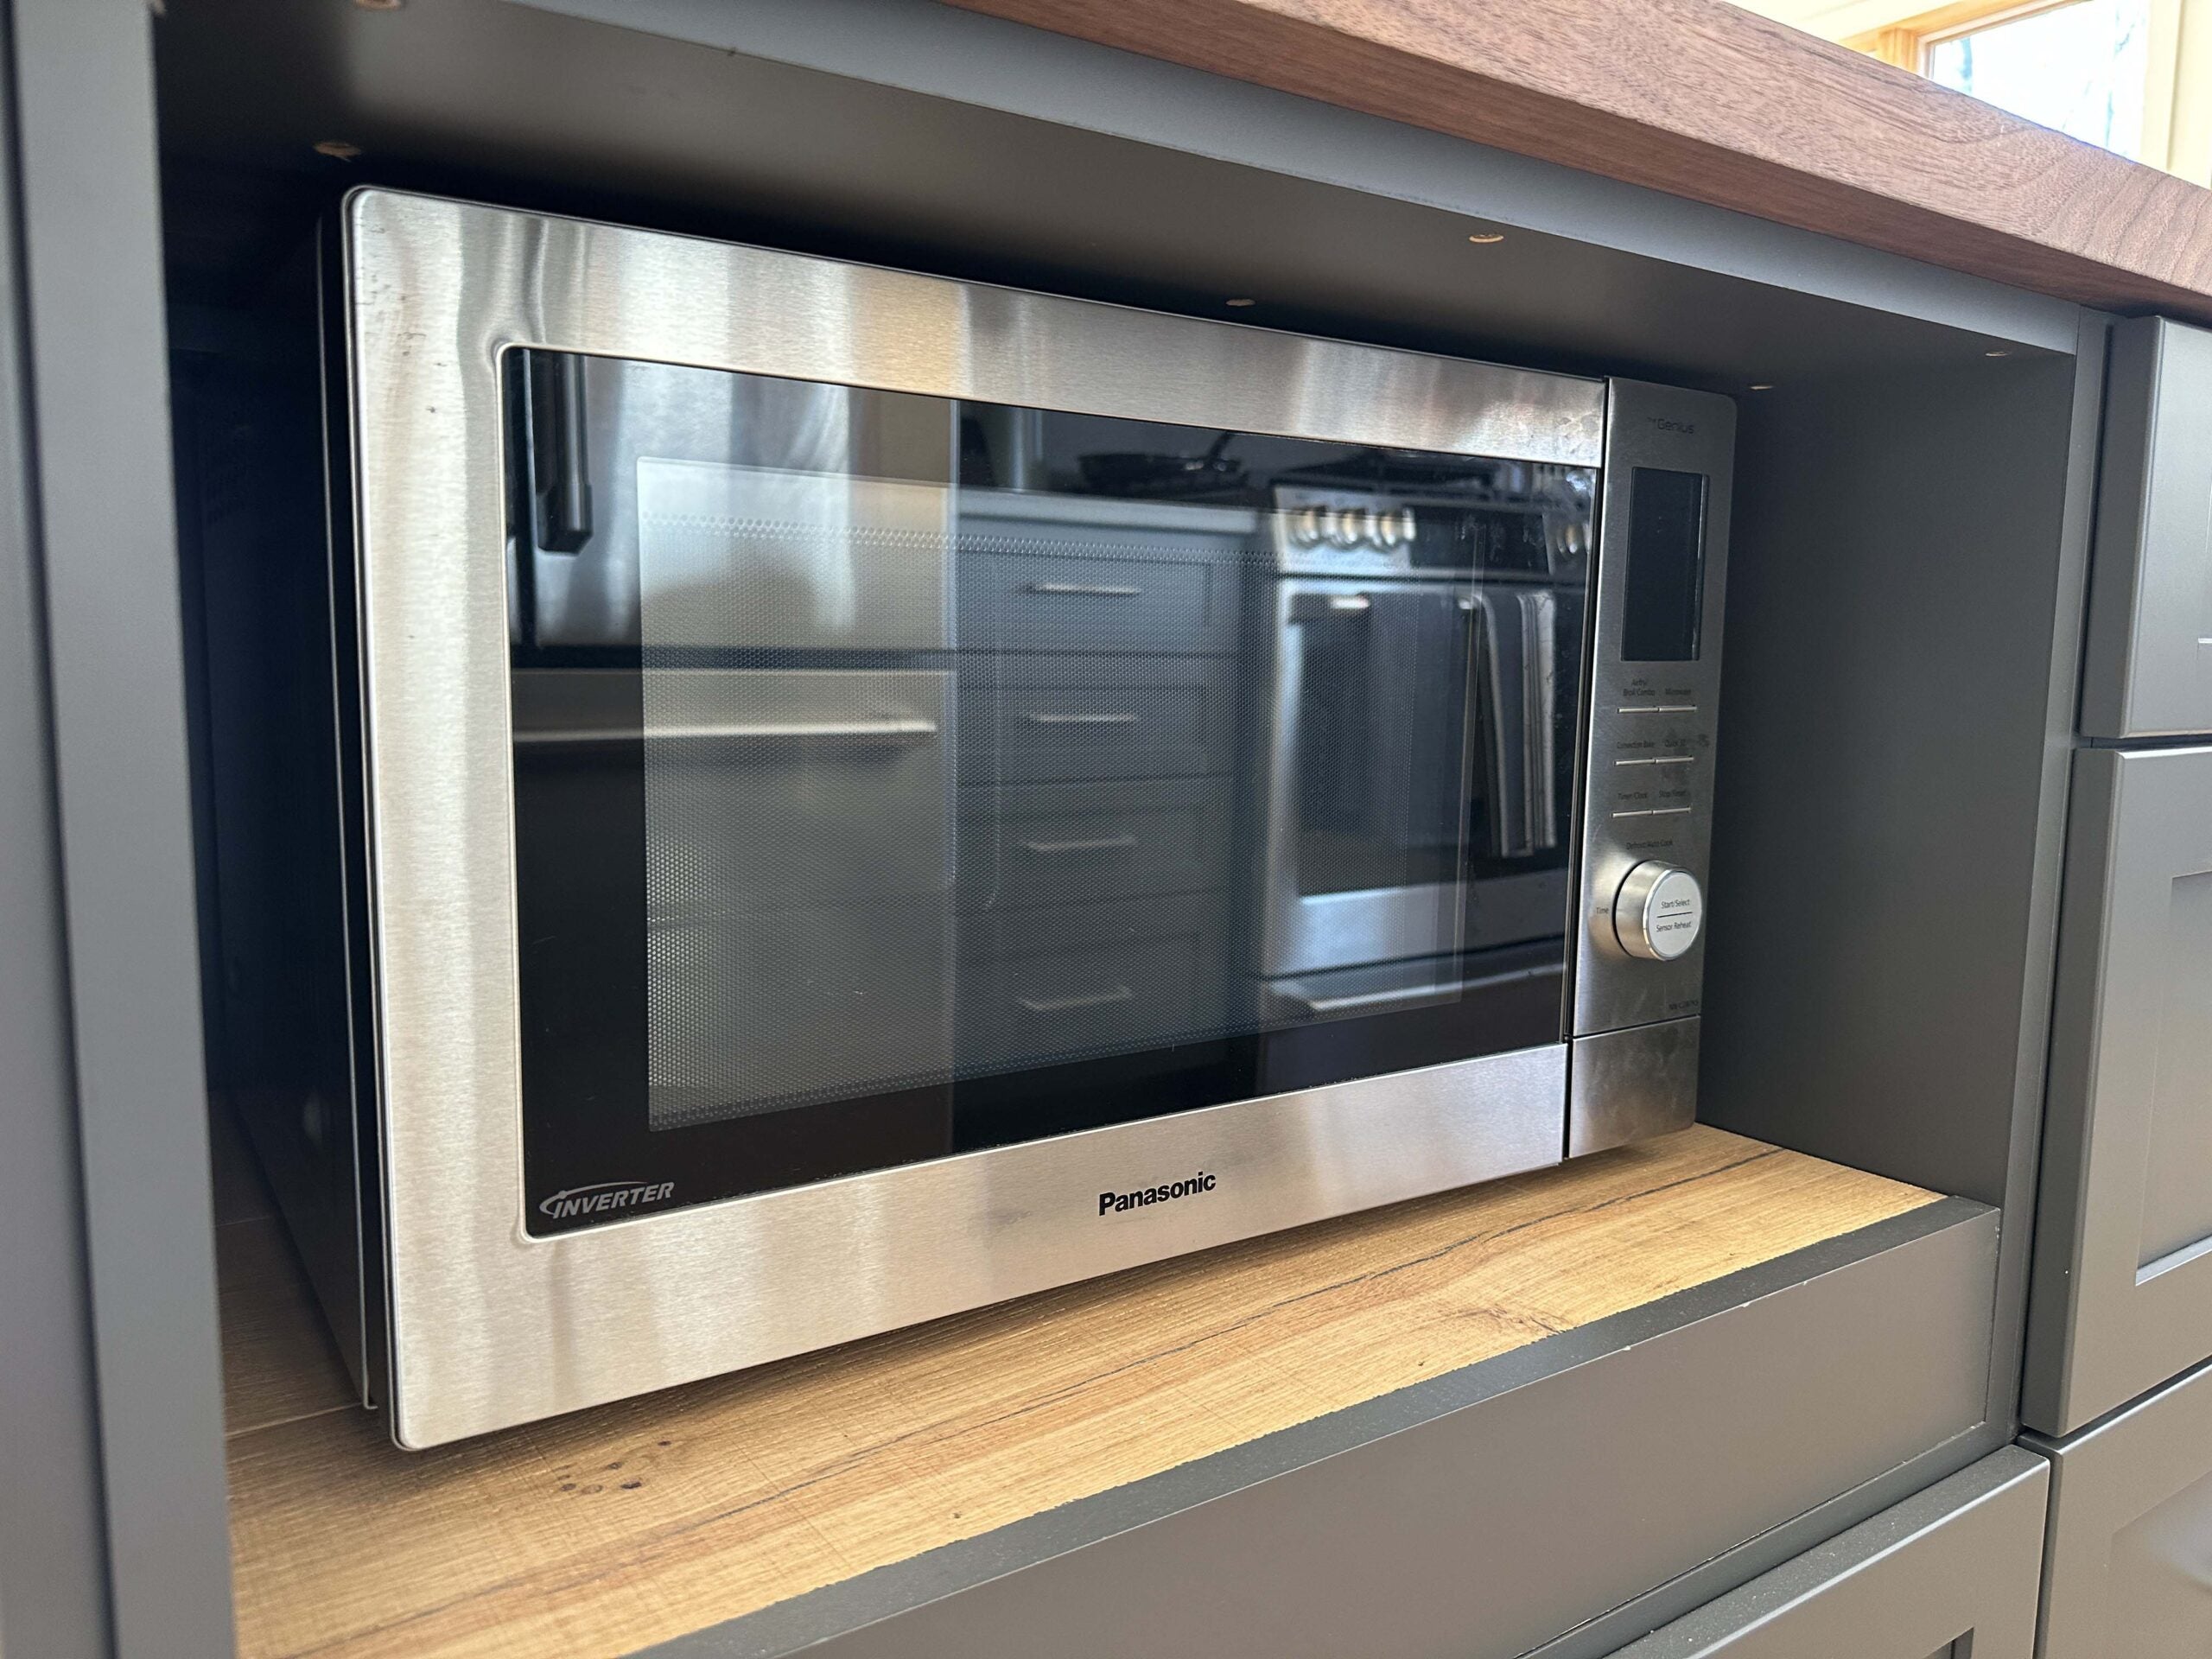 Panasonic Home Chef 4-in-1 Microwave sitting underneath a kitchen island on a wooden shelf